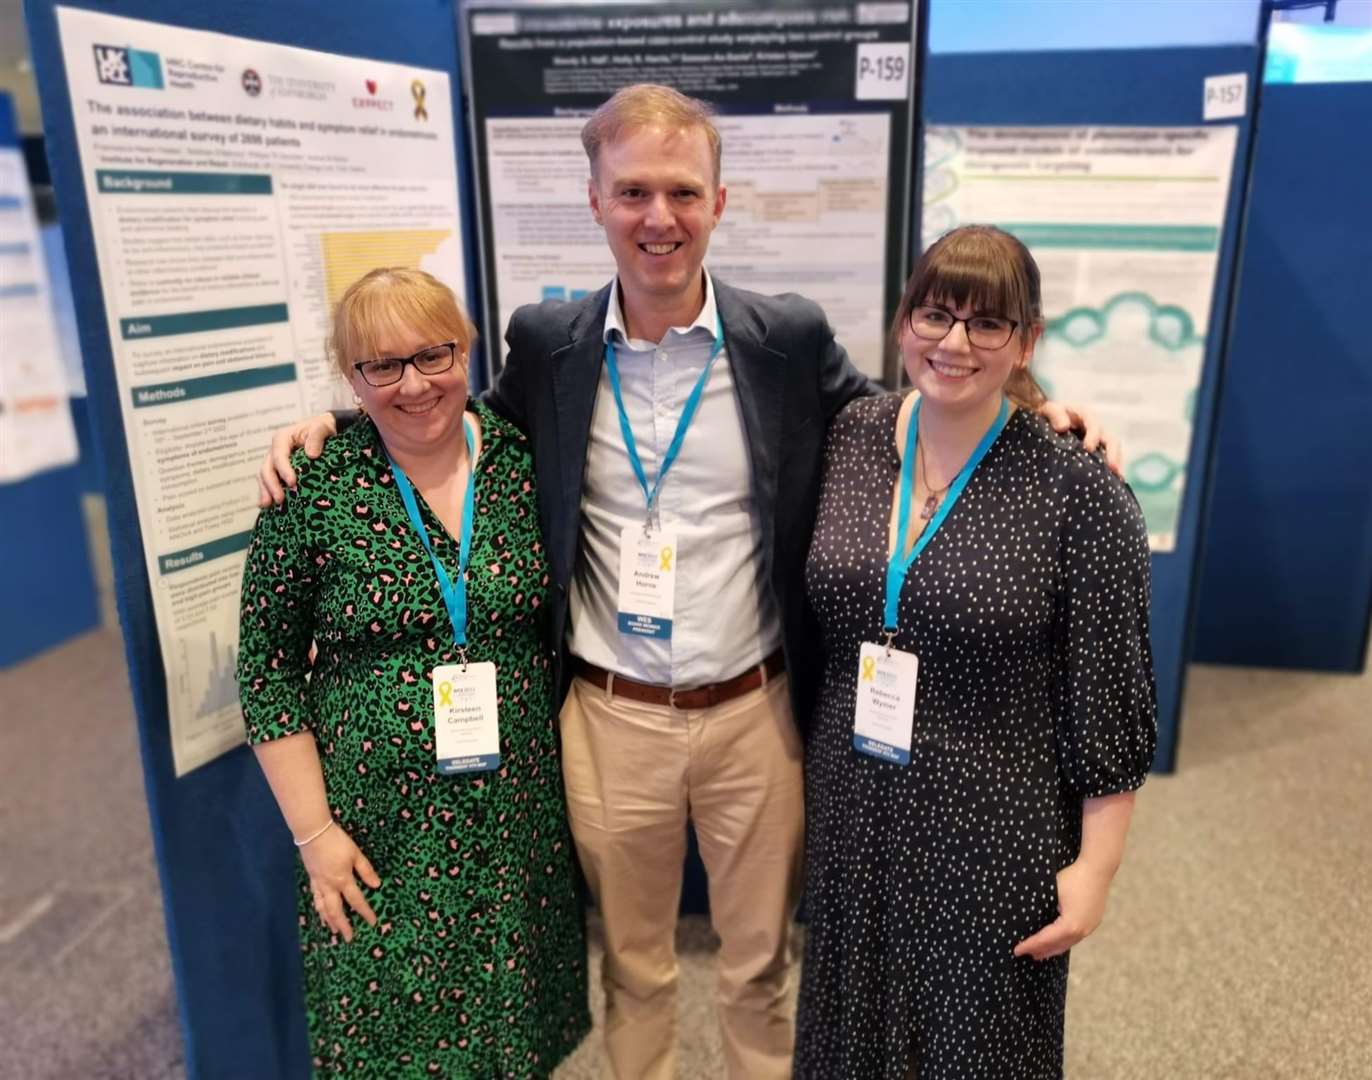 Professor Andrew Horne from the EXPPECT team with Kirsteen Campbell (left) and Rebecca Wymer at the World Congress on Endometriosis.